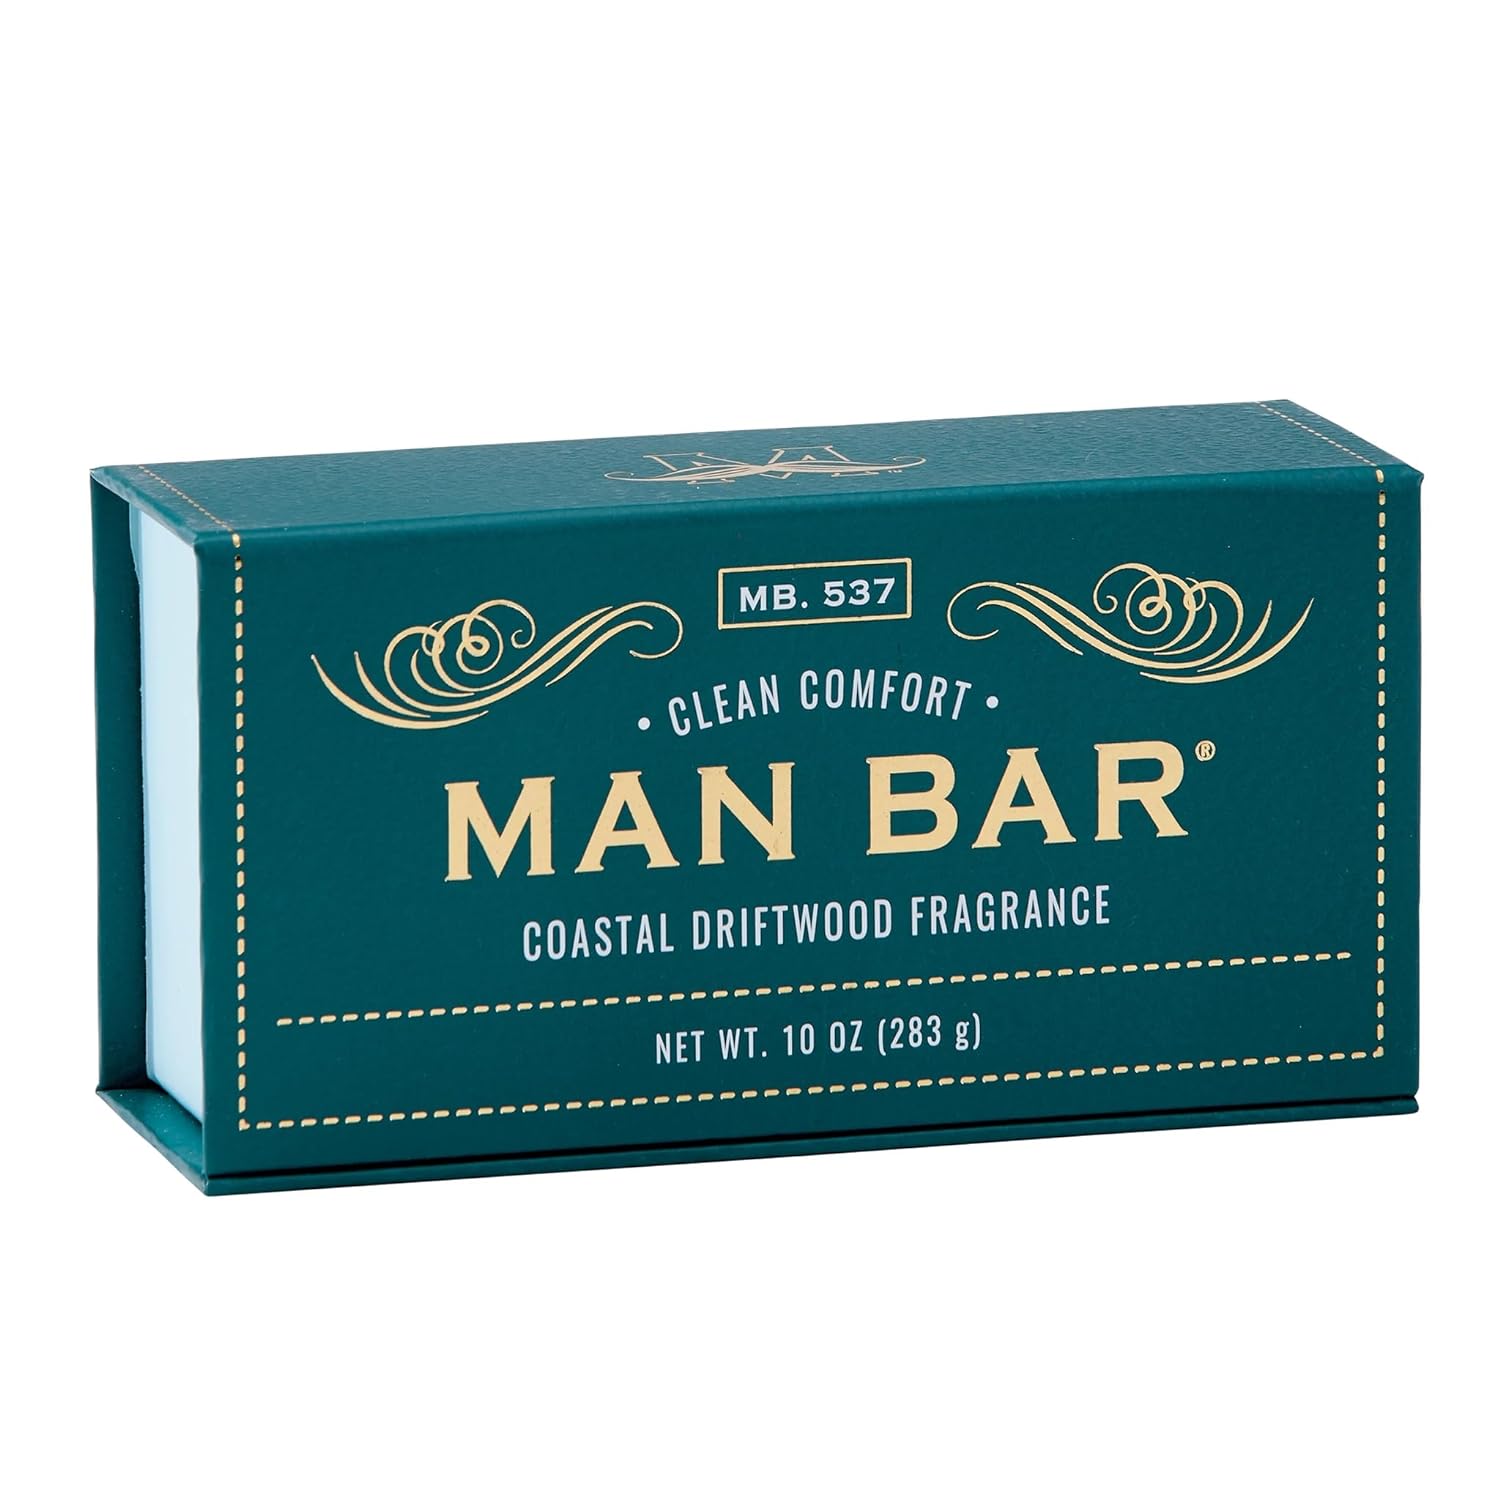 San Francisco Soap Company Coastal Driftwood Fragrance Man Bar - CLEAN - No Harmful Chemicals - Good for All Skin Types - Made in the USA